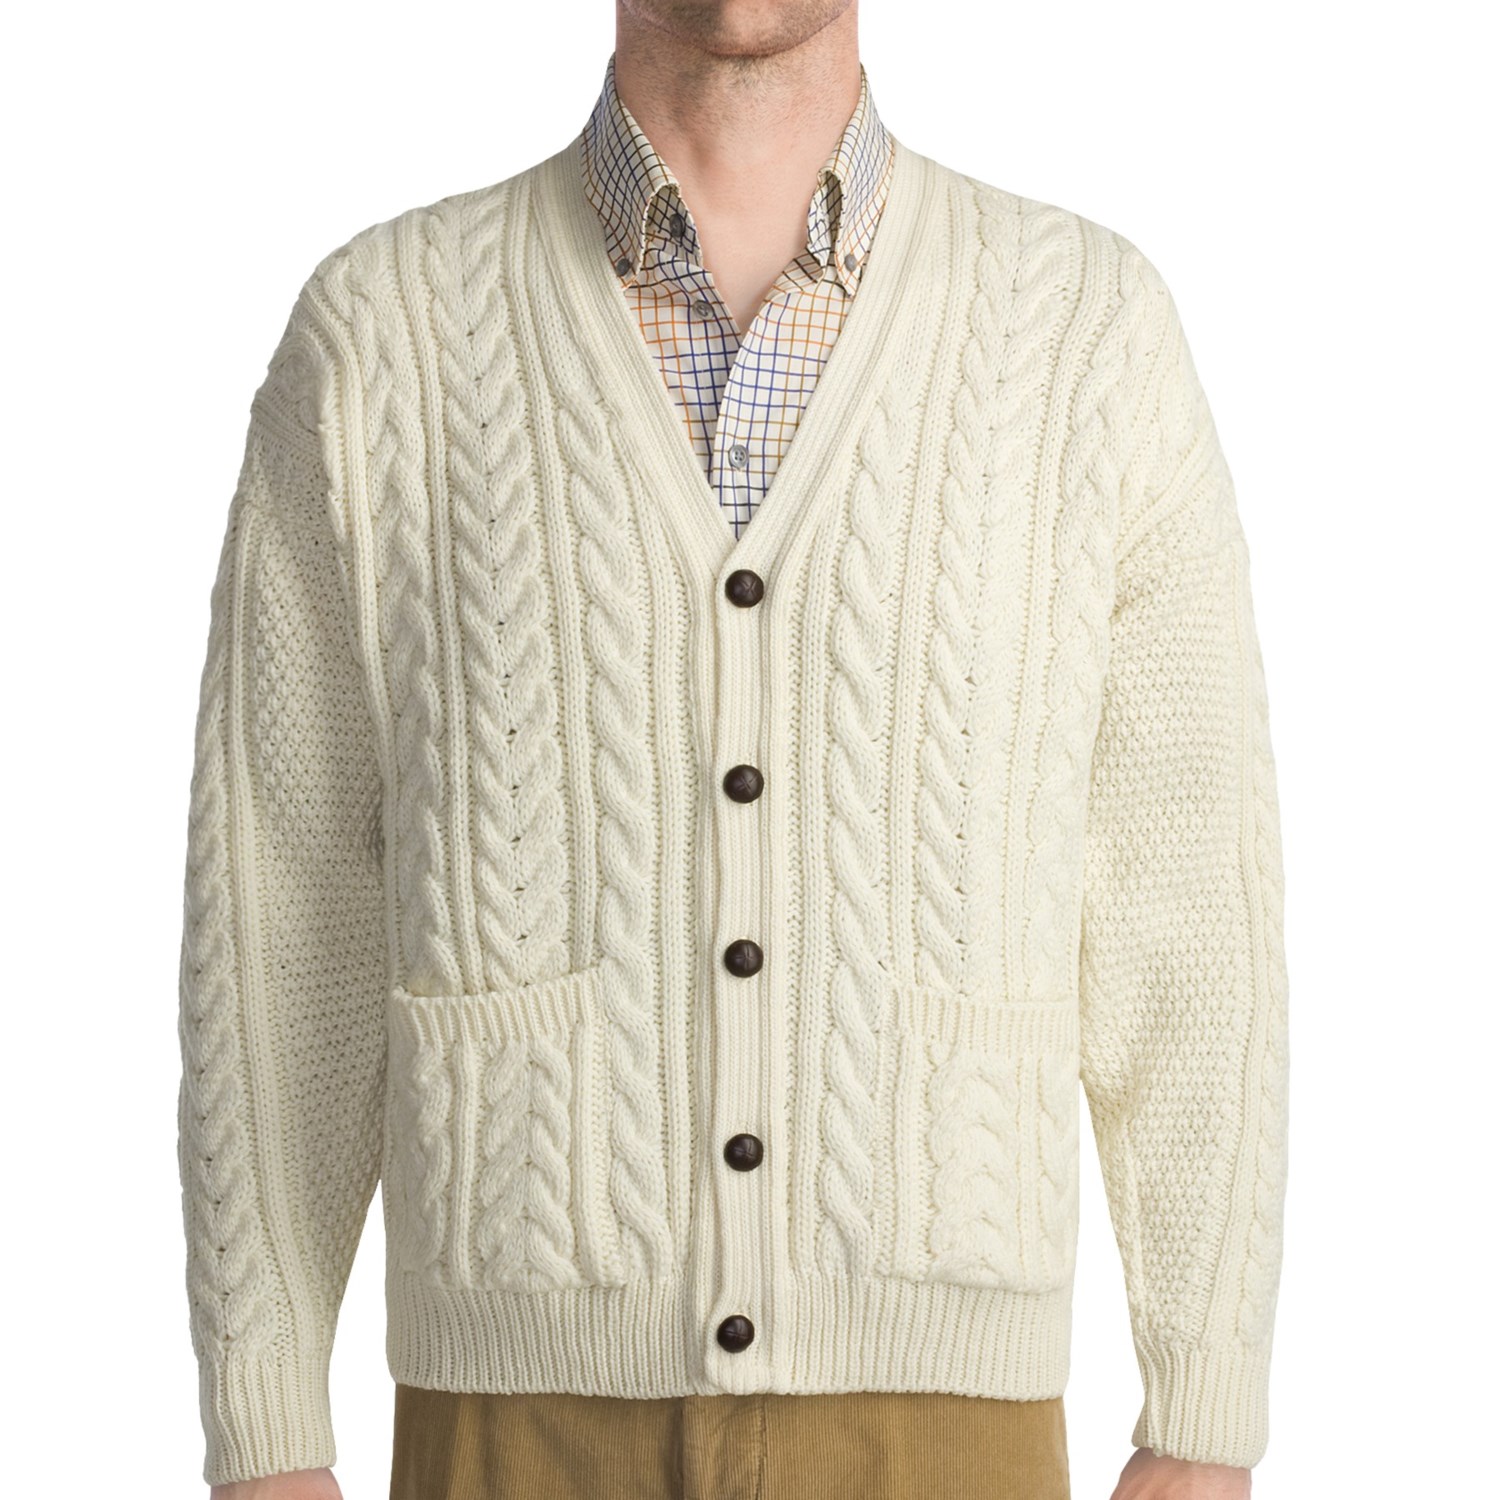 Peregrine by J.G. Glover Cardigan Sweater - Fine Wool (For Men) - Save 49%